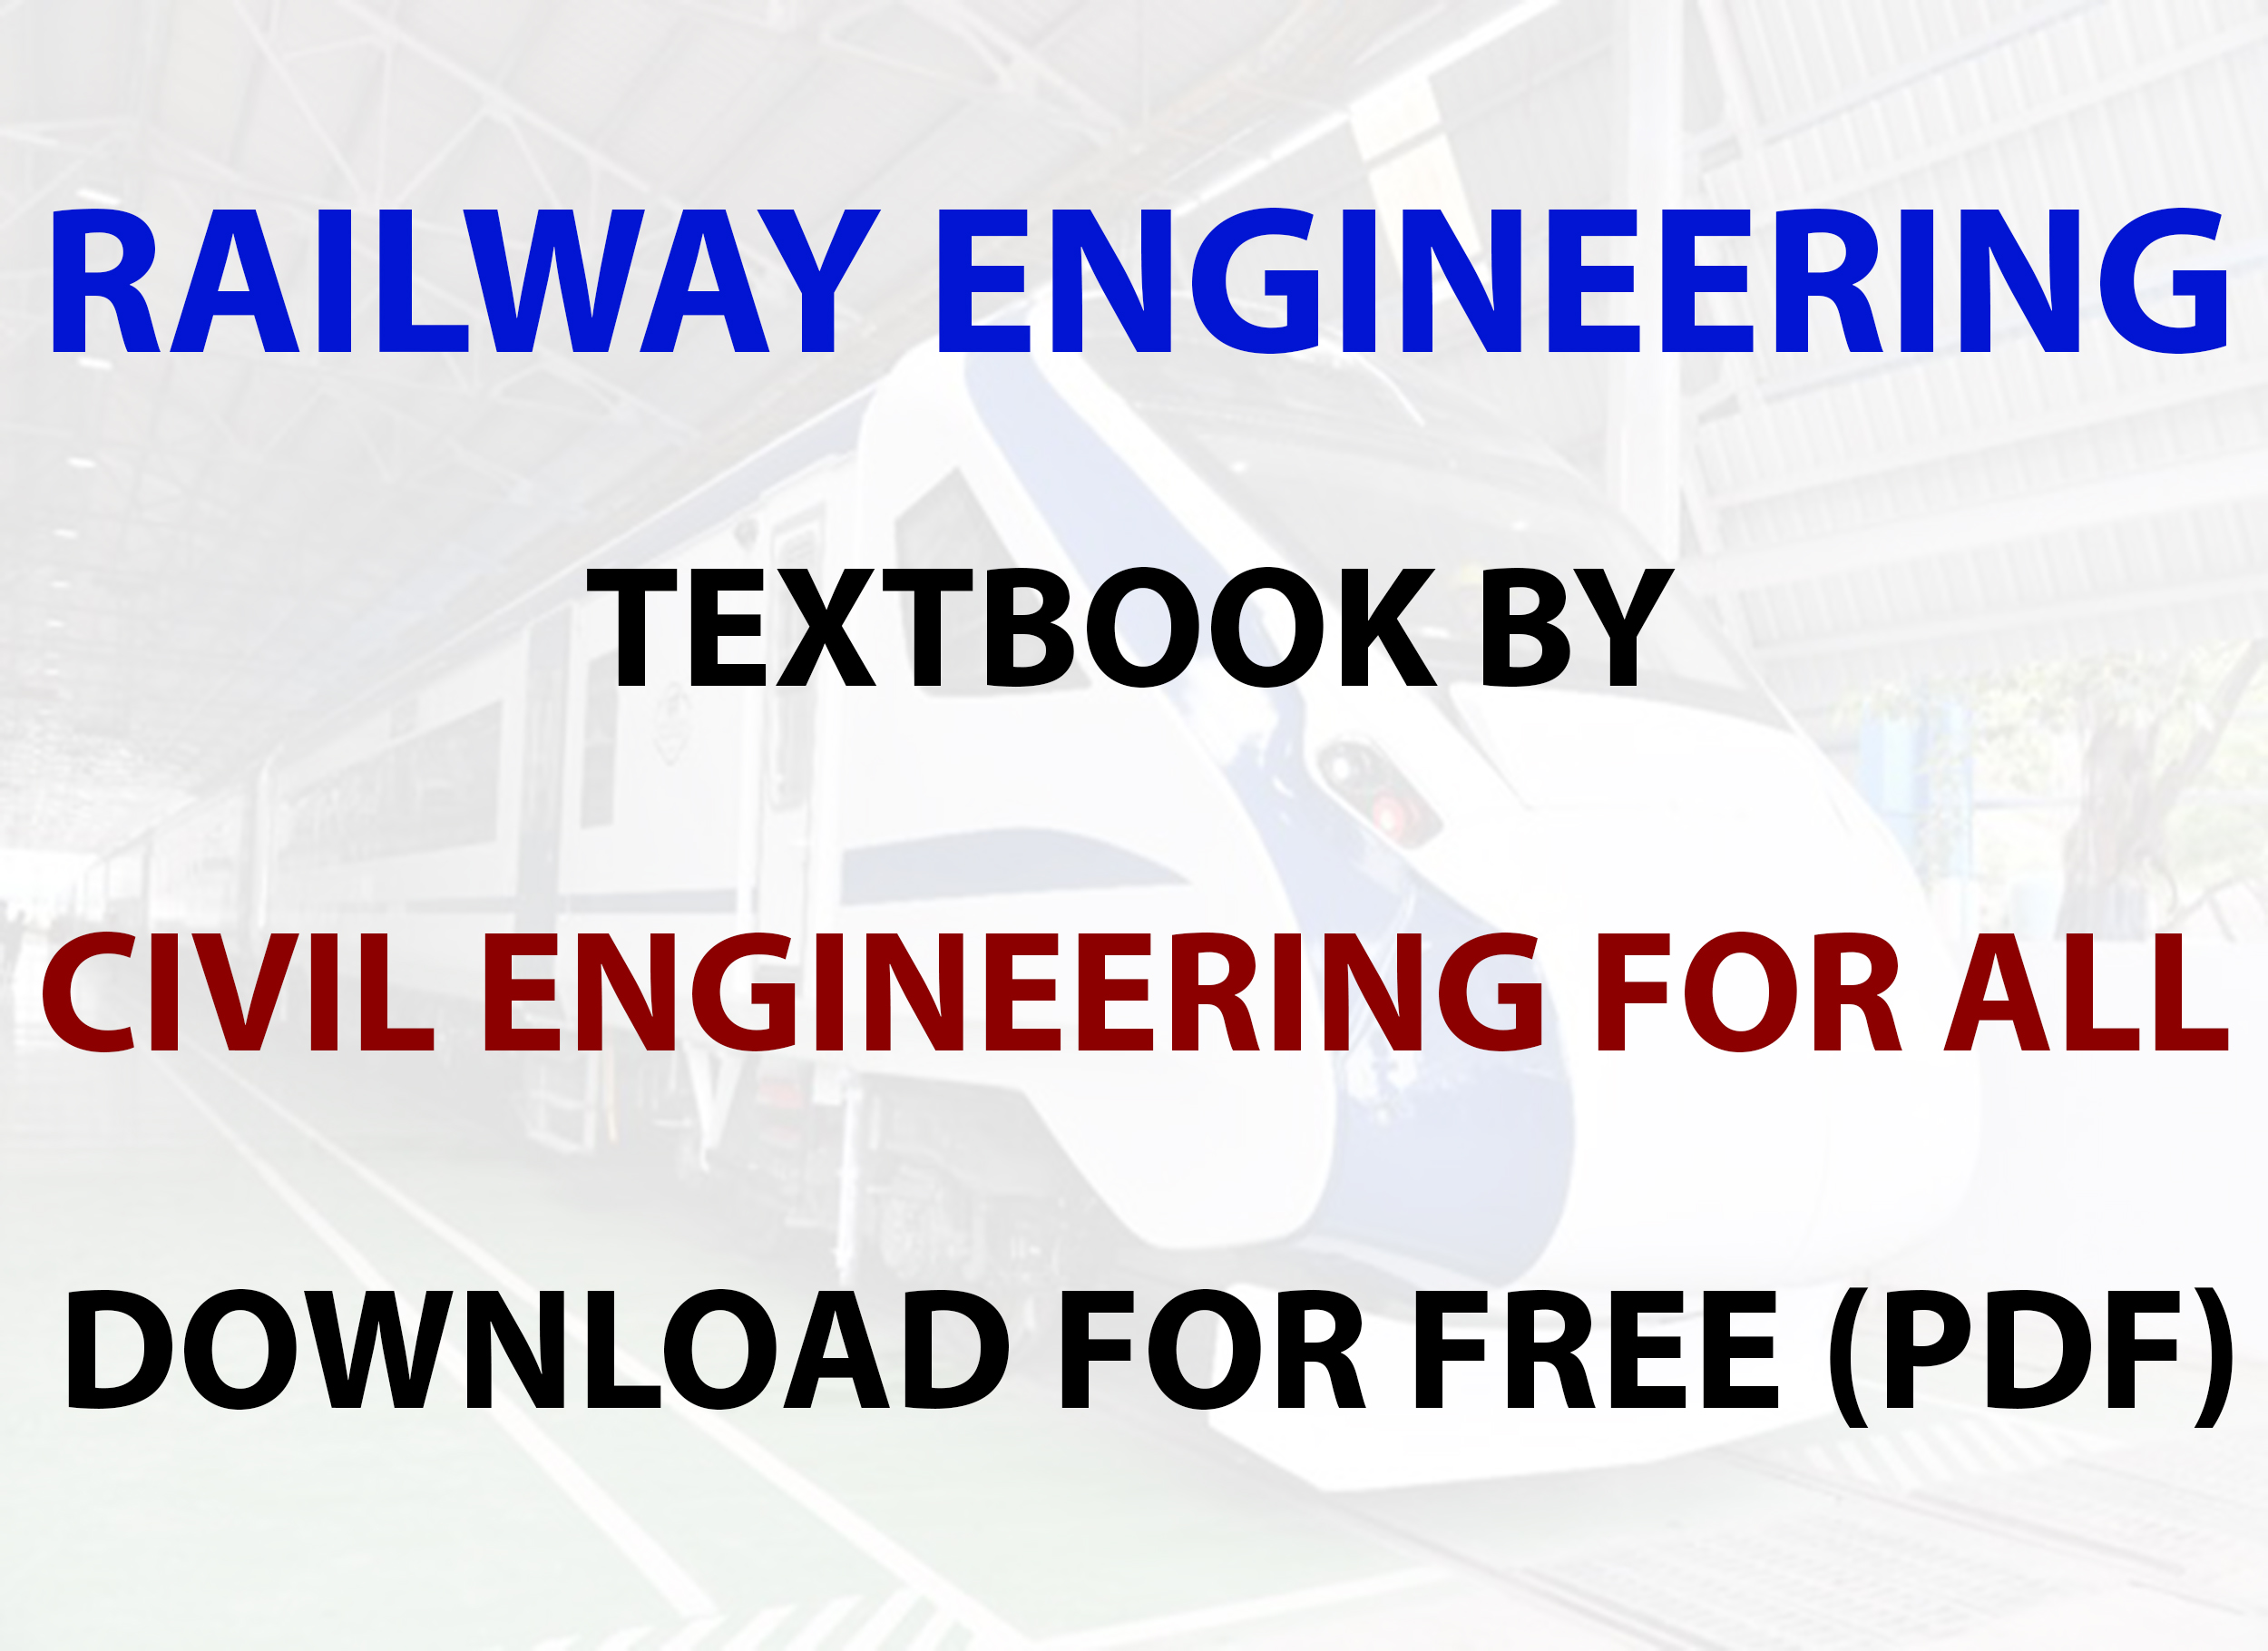 RAILWAY ENGINEERING TEXTBOOK BY CIVILENGGFORALL FREE DOWNLOAD PDF